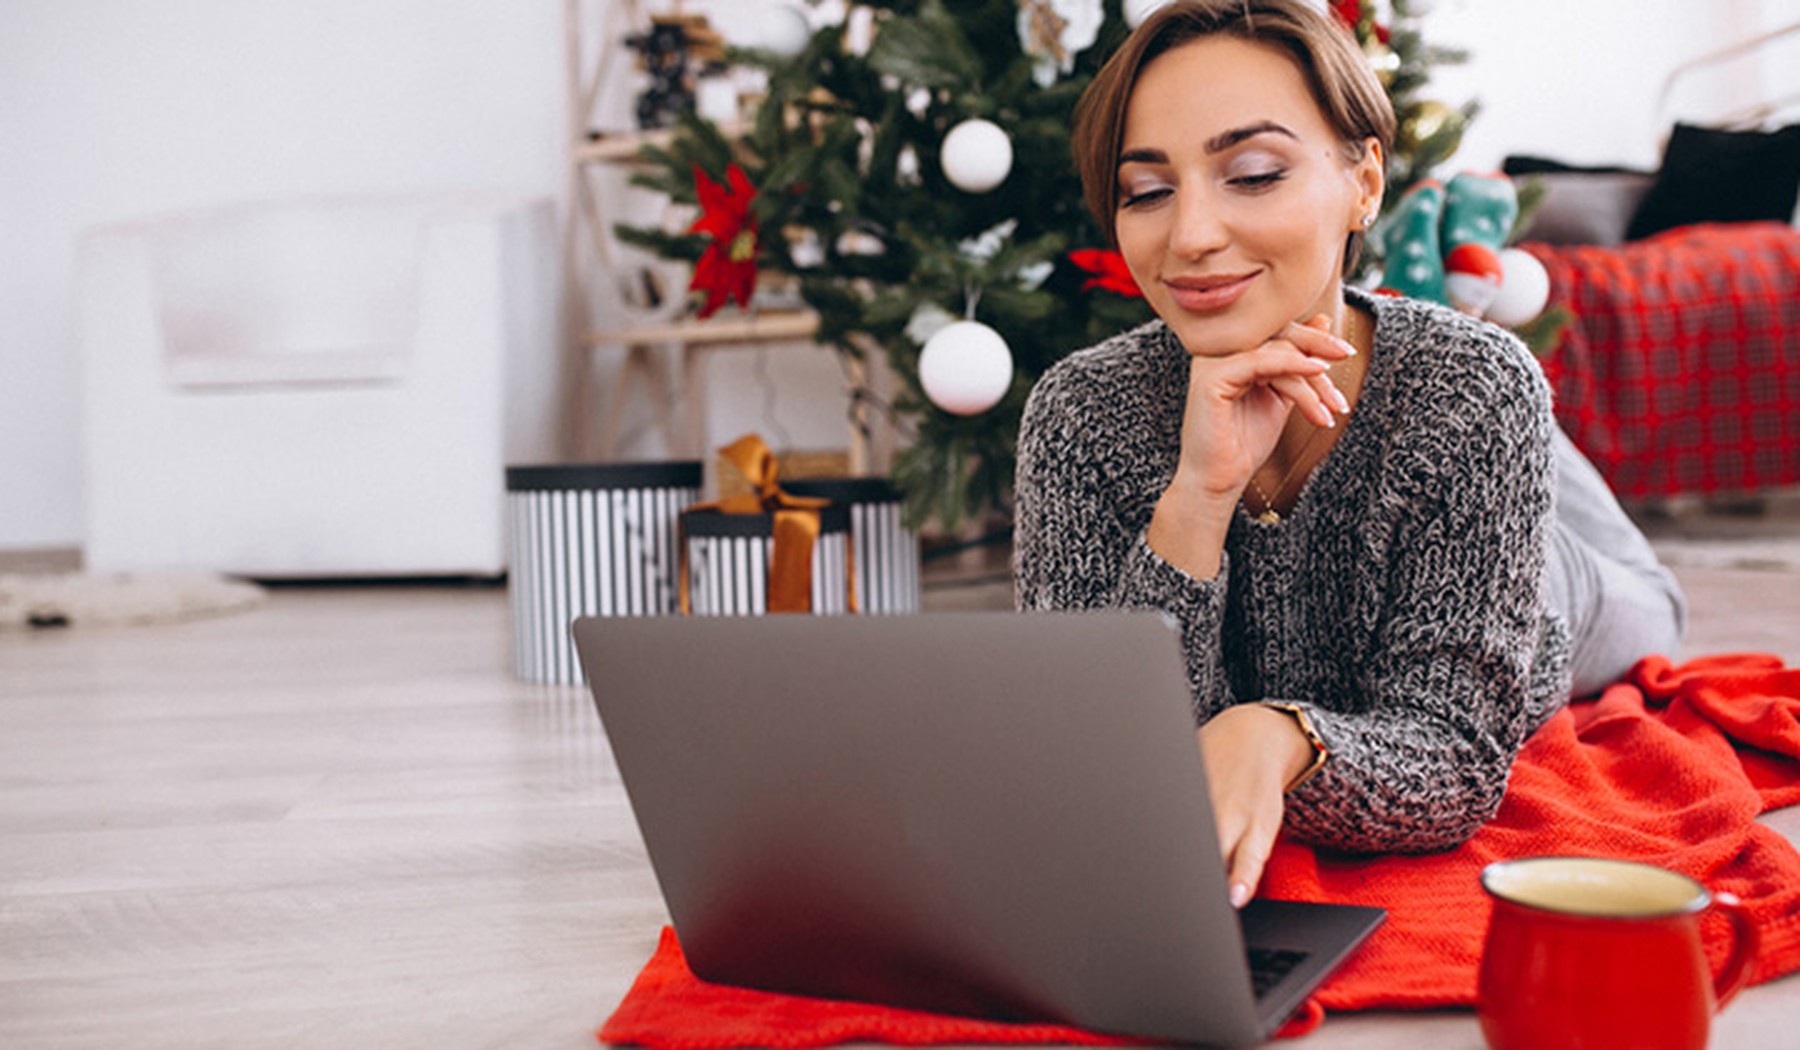 Woman in front of Christmas tree looking at her laptop